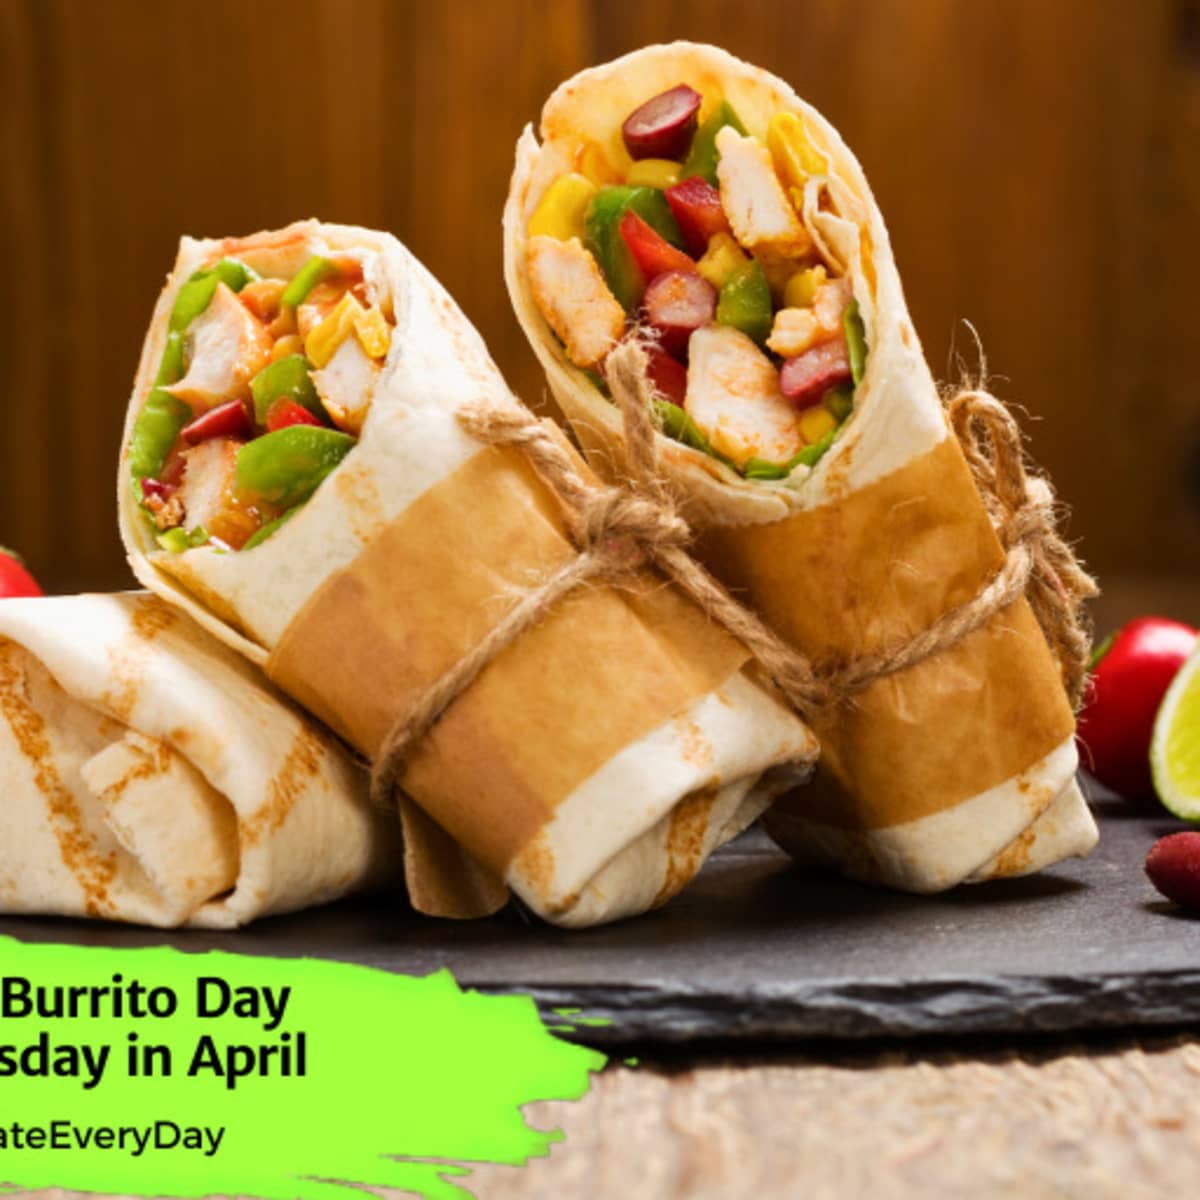 onthisday The Sheet Burrito Wad has met its match 💥 Wad-Free® ships